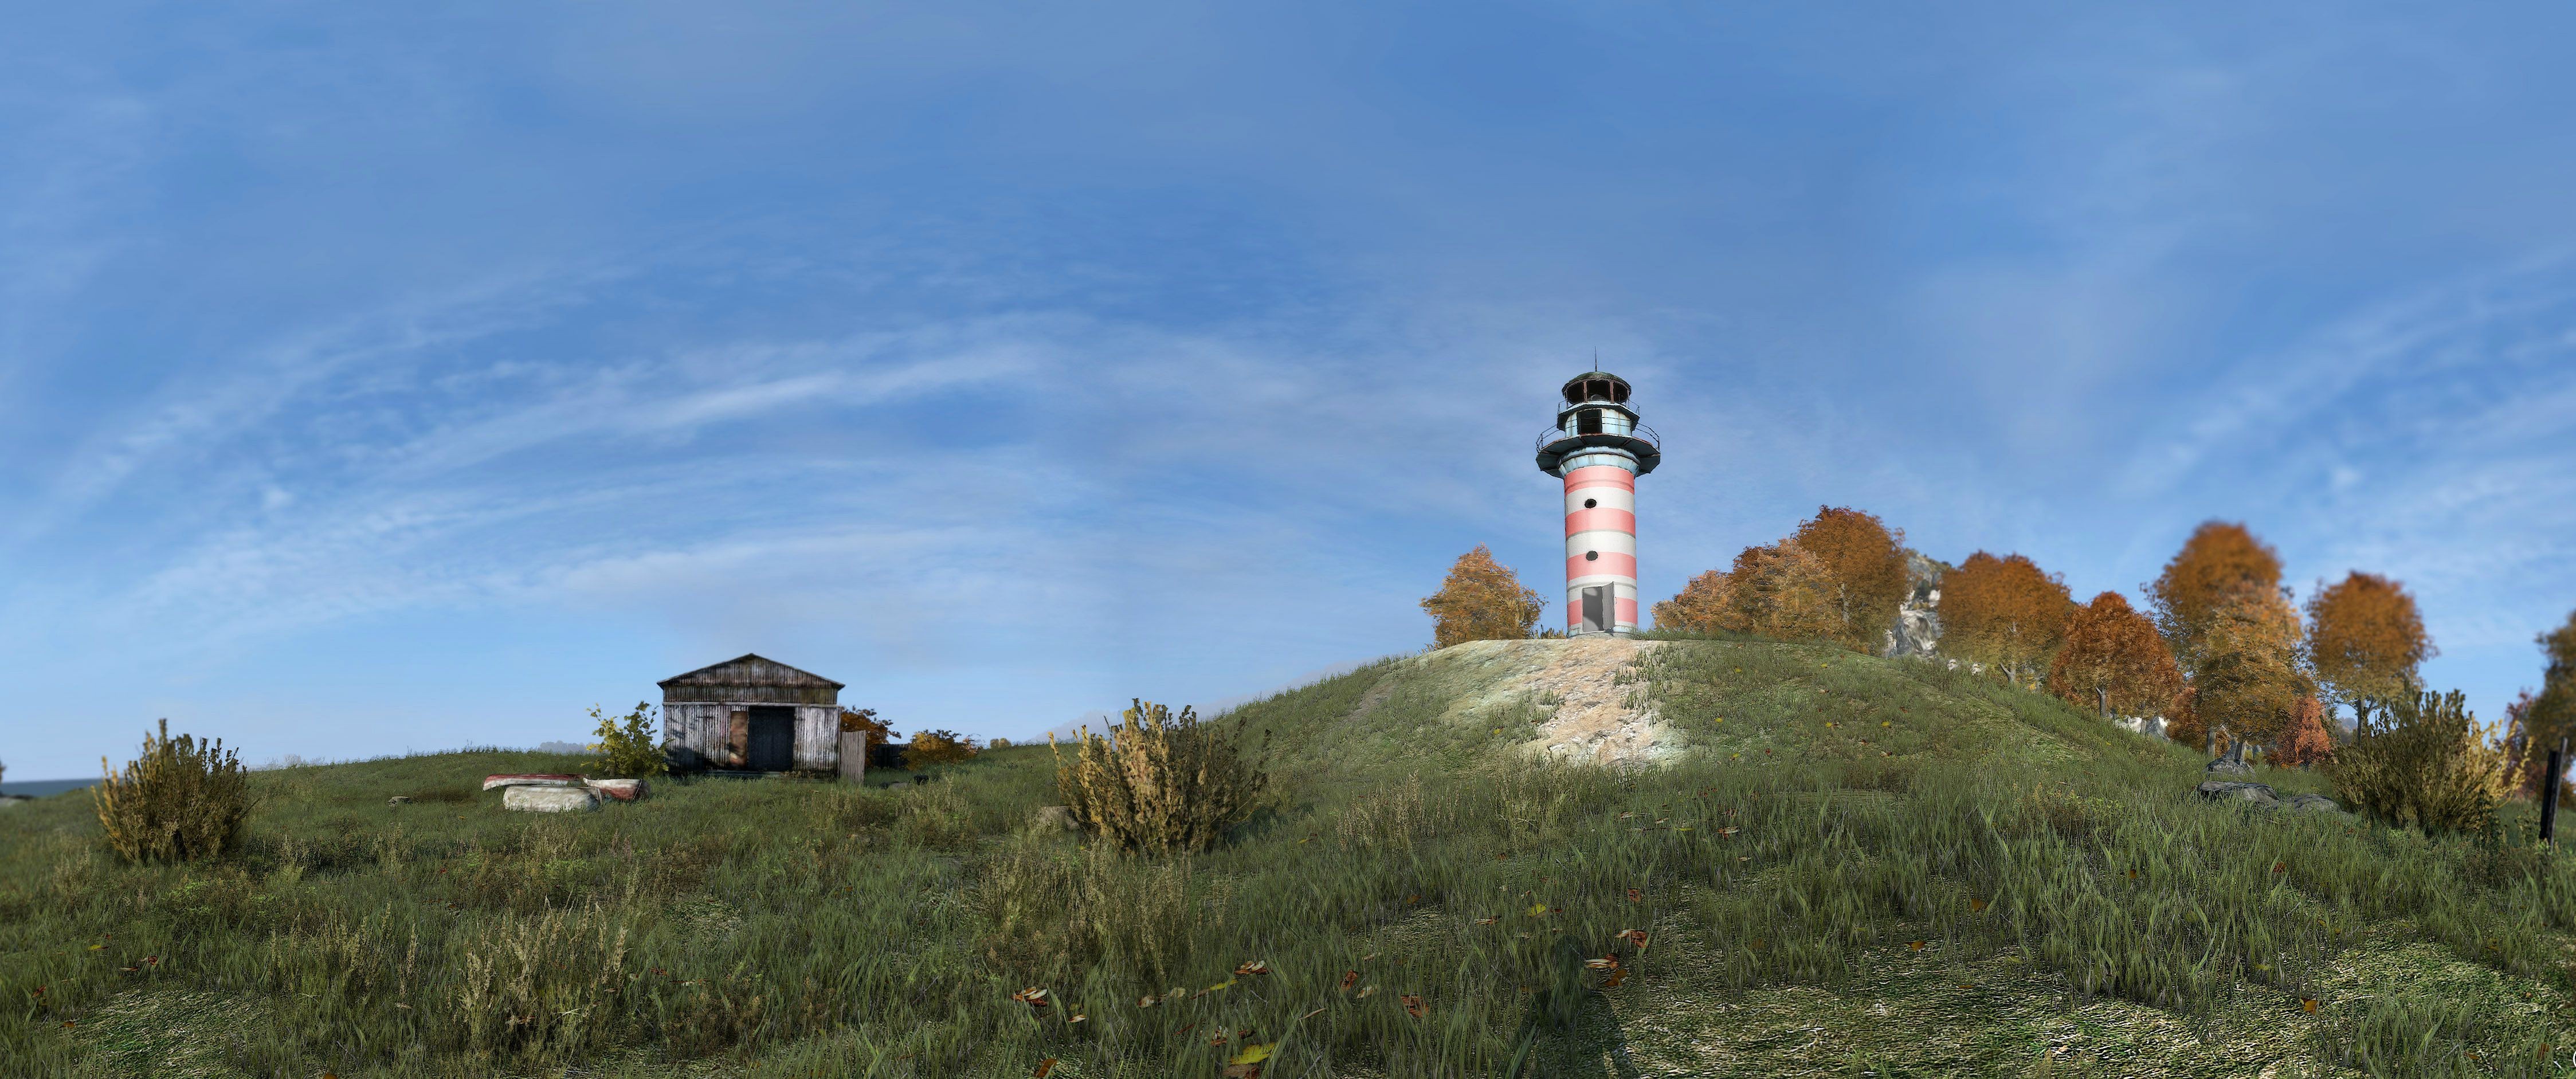 General 4495x1883 DayZ video games screen shot PC gaming video game landscape lighthouse